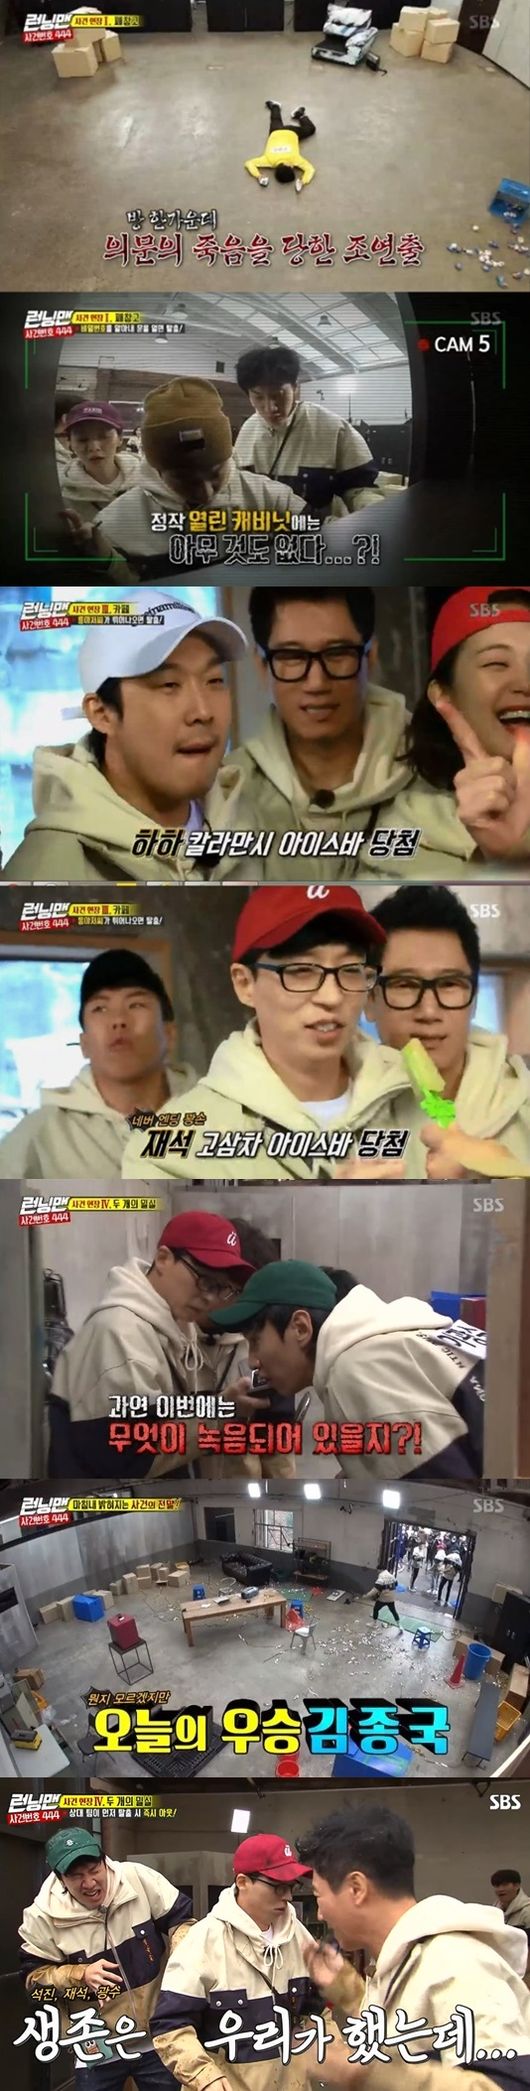 SBS Running Man kept the top spot in the same time zone of 2049 ratings.According to Nielsen Korea, the ratings agency Running Man, which aired on the 24th, recorded a 4 percent of the 2049 target audience rating (based on the second part of the audience rating of the Seoul Capital Area household), which is an important indicator of major advertising officials, and ranked No. 1 in the same time zone, as well as Ugly Our Little and All-in-one Deacons, followed by Sundays 2049 TOP 3.The average audience rating was 5.3% in the first part and 7.4% in the second part (based on the audience rating of Seoul Capital Area households), and the highest audience rating per minute rose to 8.4%.The broadcast was featured on the race Case Number 444, which is looking for the sign of the supporting actor A who was questioned.The members gathered in the waste warehouse had to find the killer who had outed the assistant A until the sun went down, and as a result of collecting the evidence one by one, they learned that there was a password in Song Ji-hyo shoes.Song Ji-hyo was suspected of being the culprit, but the members then performed the mission in turn and got hints, divided into Ji Suk-jin and Song Ji-hyo teams, and played a team confrontation that had to find out the culprit first.Yoo Jae-Suk, who combined hints of numerous missions, shouted that the identity of the criminal was fine dust and was ordered to escape the room by three people except for the person who pulled the lever on the last mission.Kim Jong-kook pulled the lever in urgency, and Yoo Jae-Suk, Lee Kwang-soo and Ji Suk-jin escaped the room but the result was Kim Jong-kooks victory, which remained in the room.The three who betrayed their team members were hit by a water bomb, which recorded the highest audience rating of 8.4% per minute, taking the best one minute.SBS is provided.